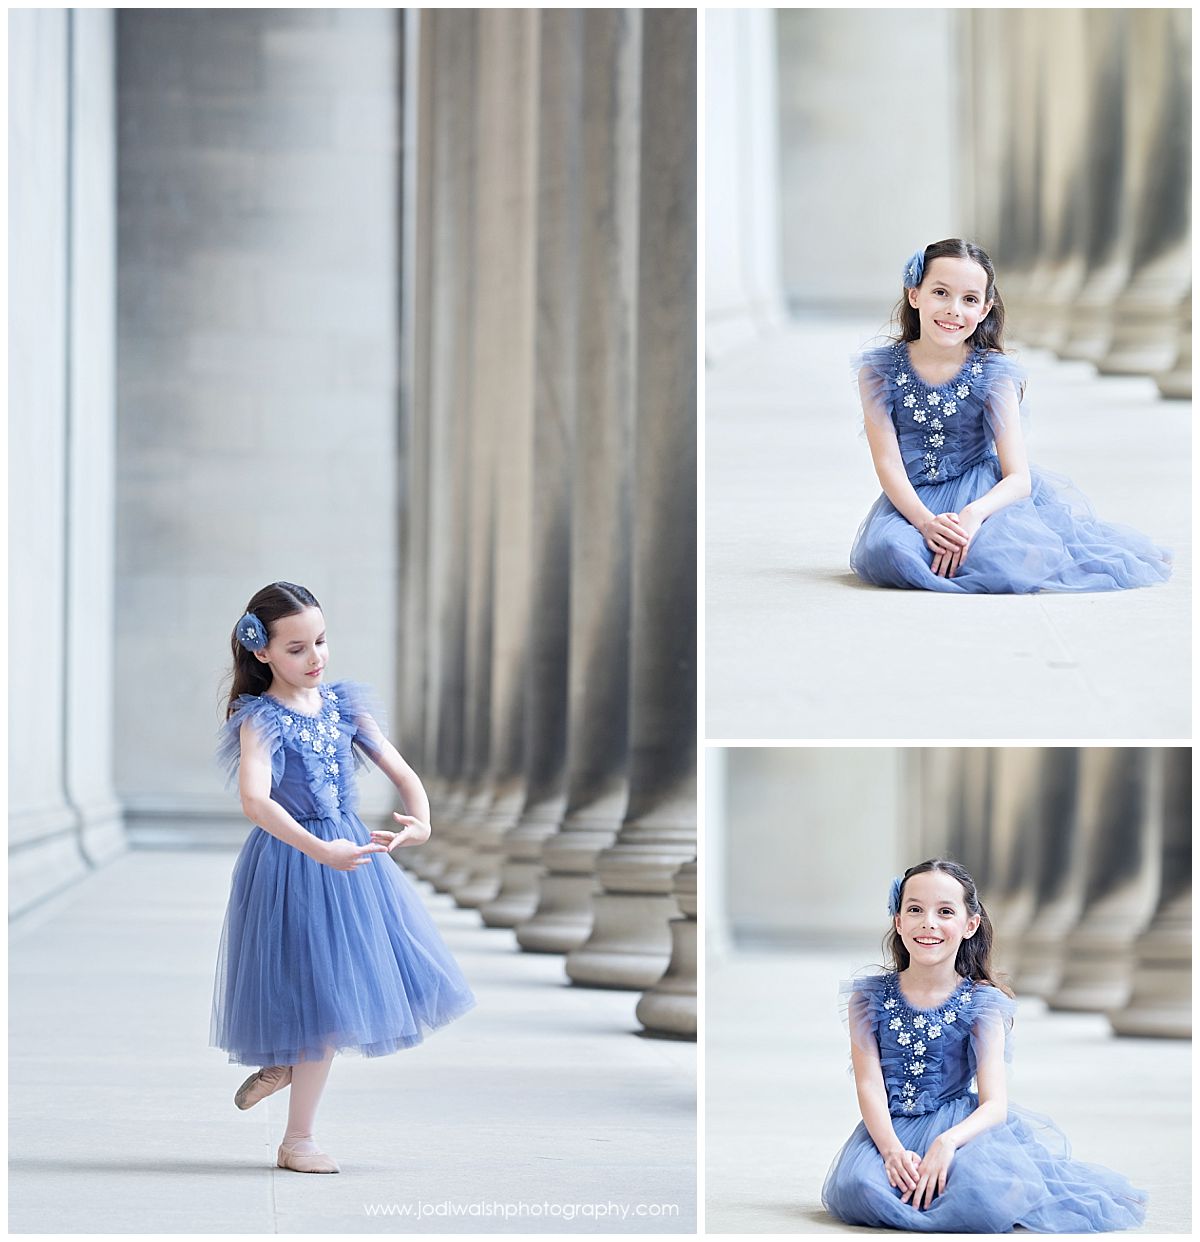 collage of images of a young girl with long dark hair, wearing a blue tulle dress, in a long hallway with stone columns